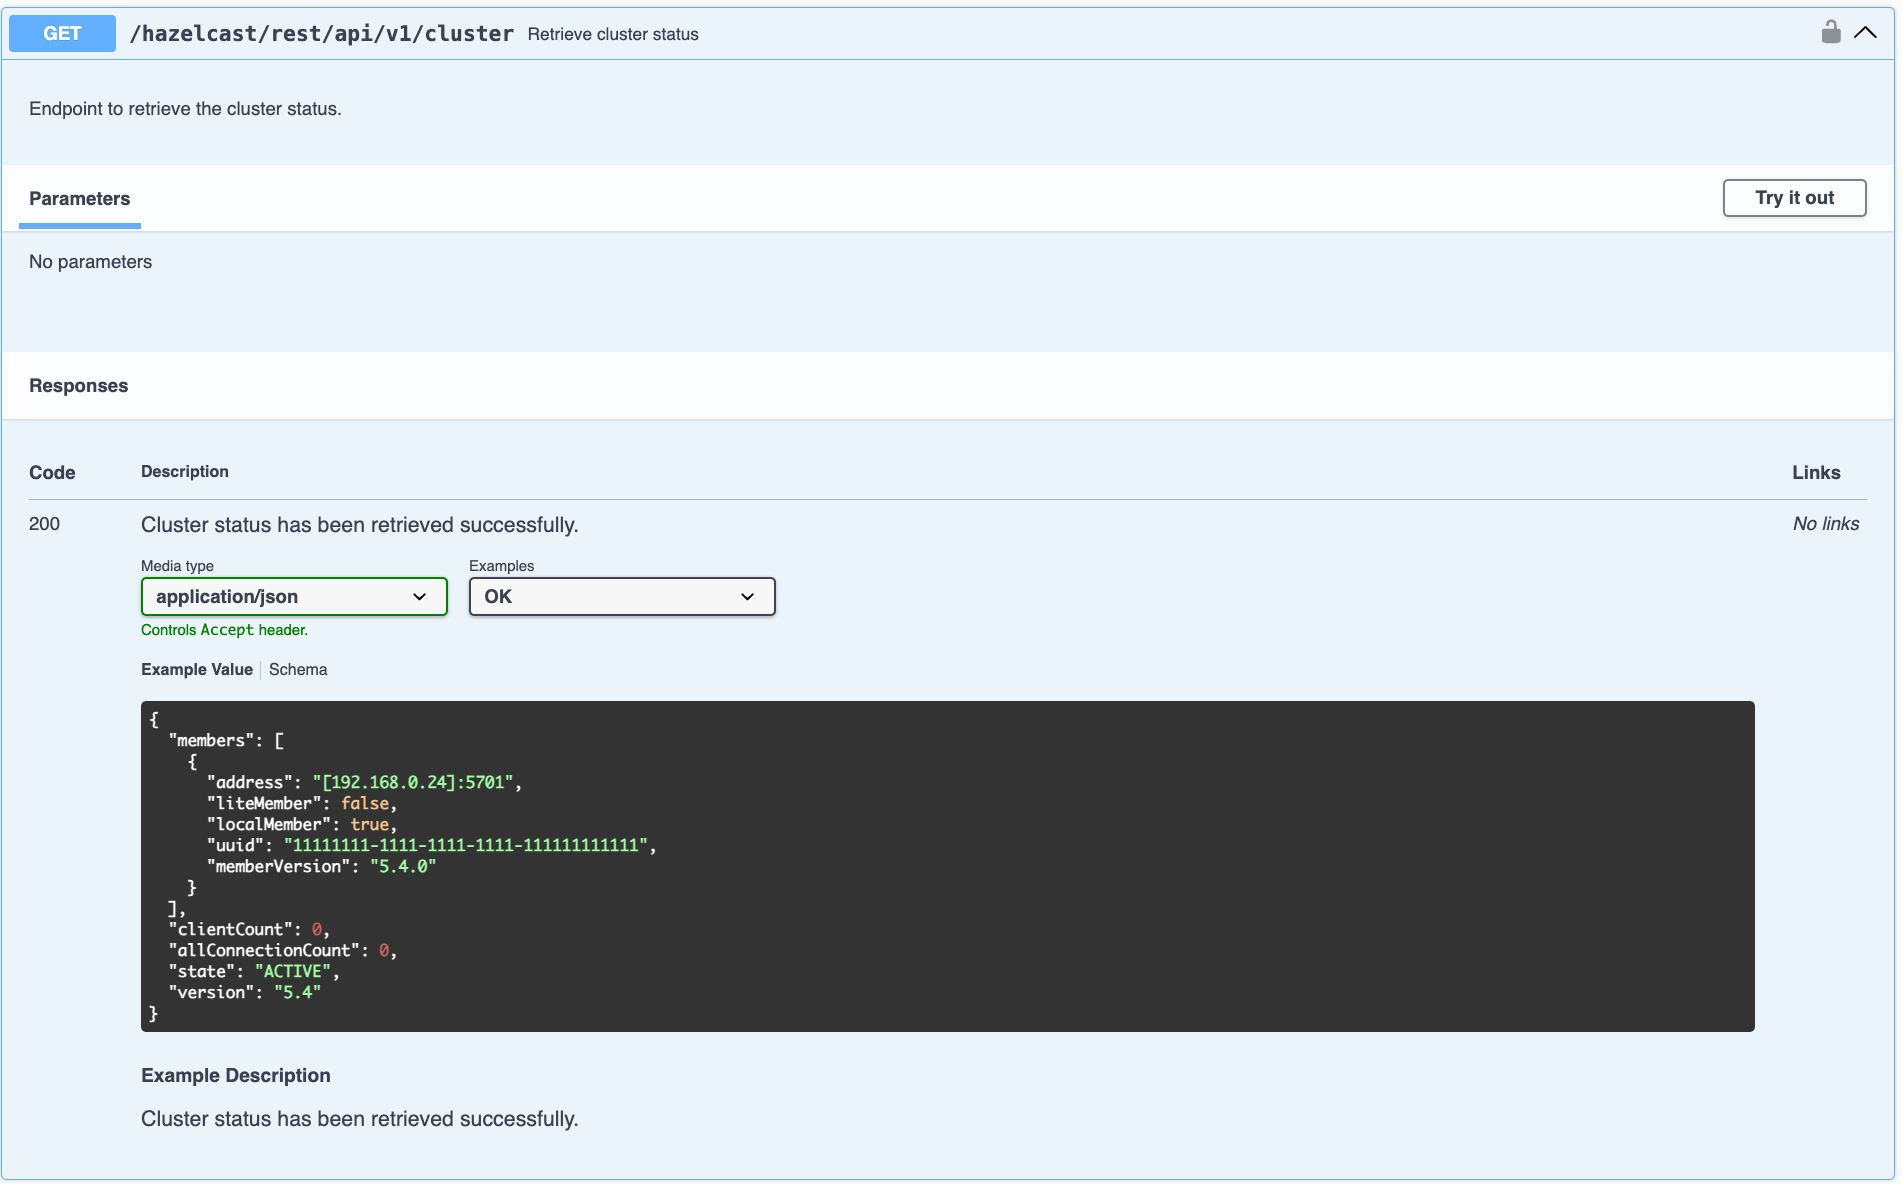 Example Swagger UI showing cluster endpoint